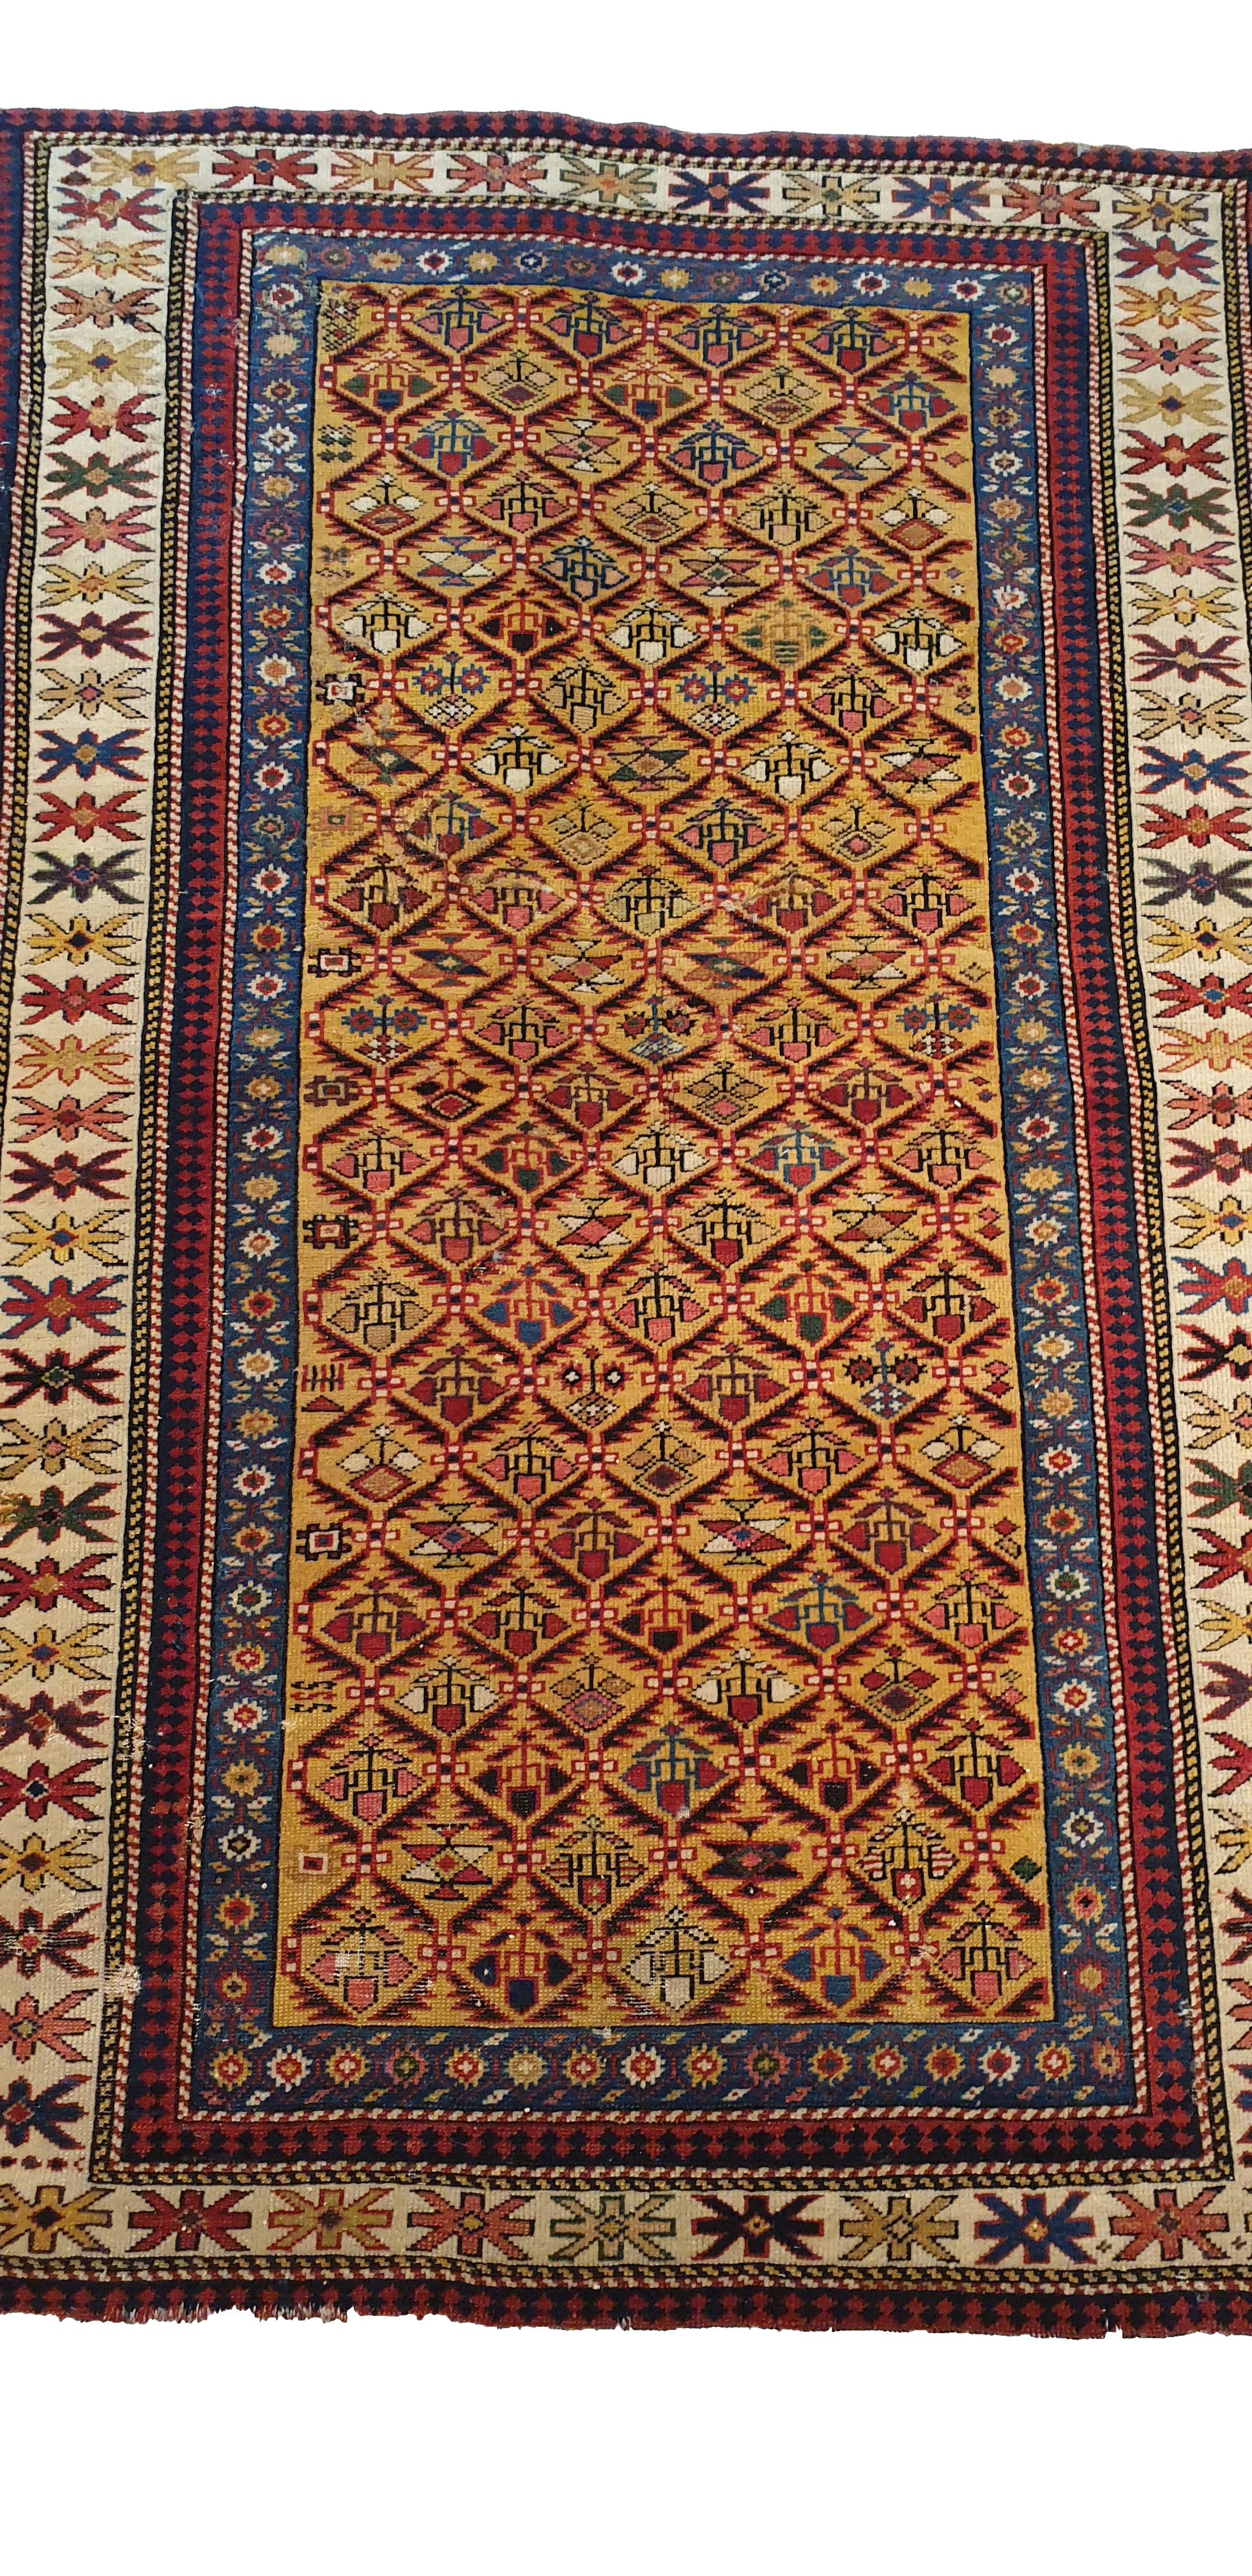 Hand-Knotted  Daghestan Rug Russian wool, 19th Century - N° 635 For Sale